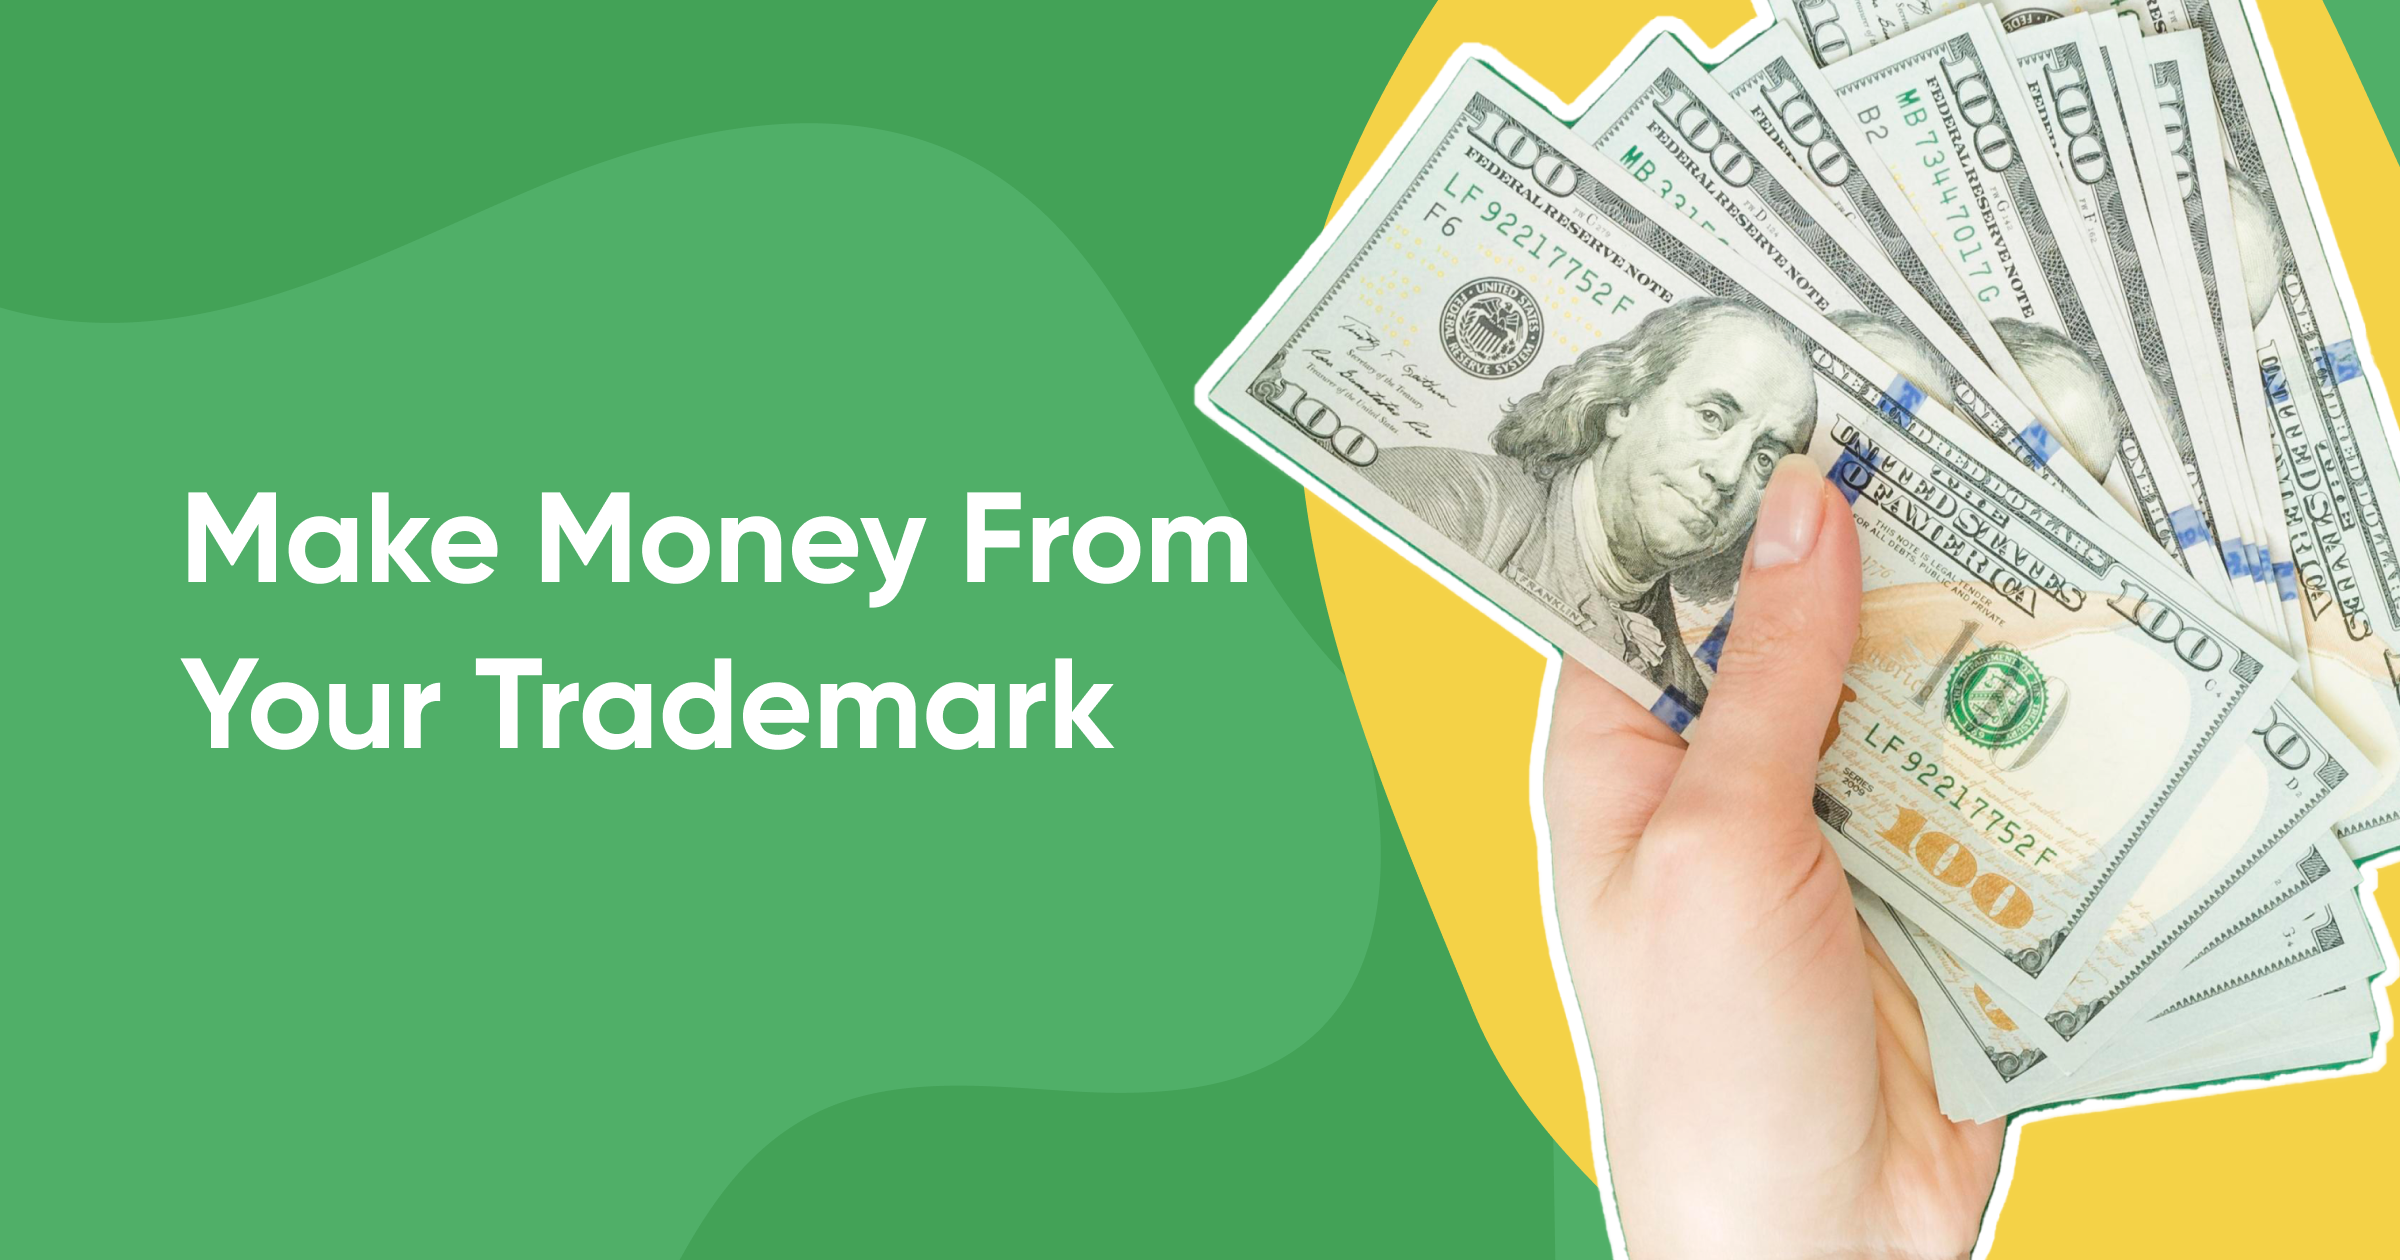 5 Ways to Make Money From Your Trademark